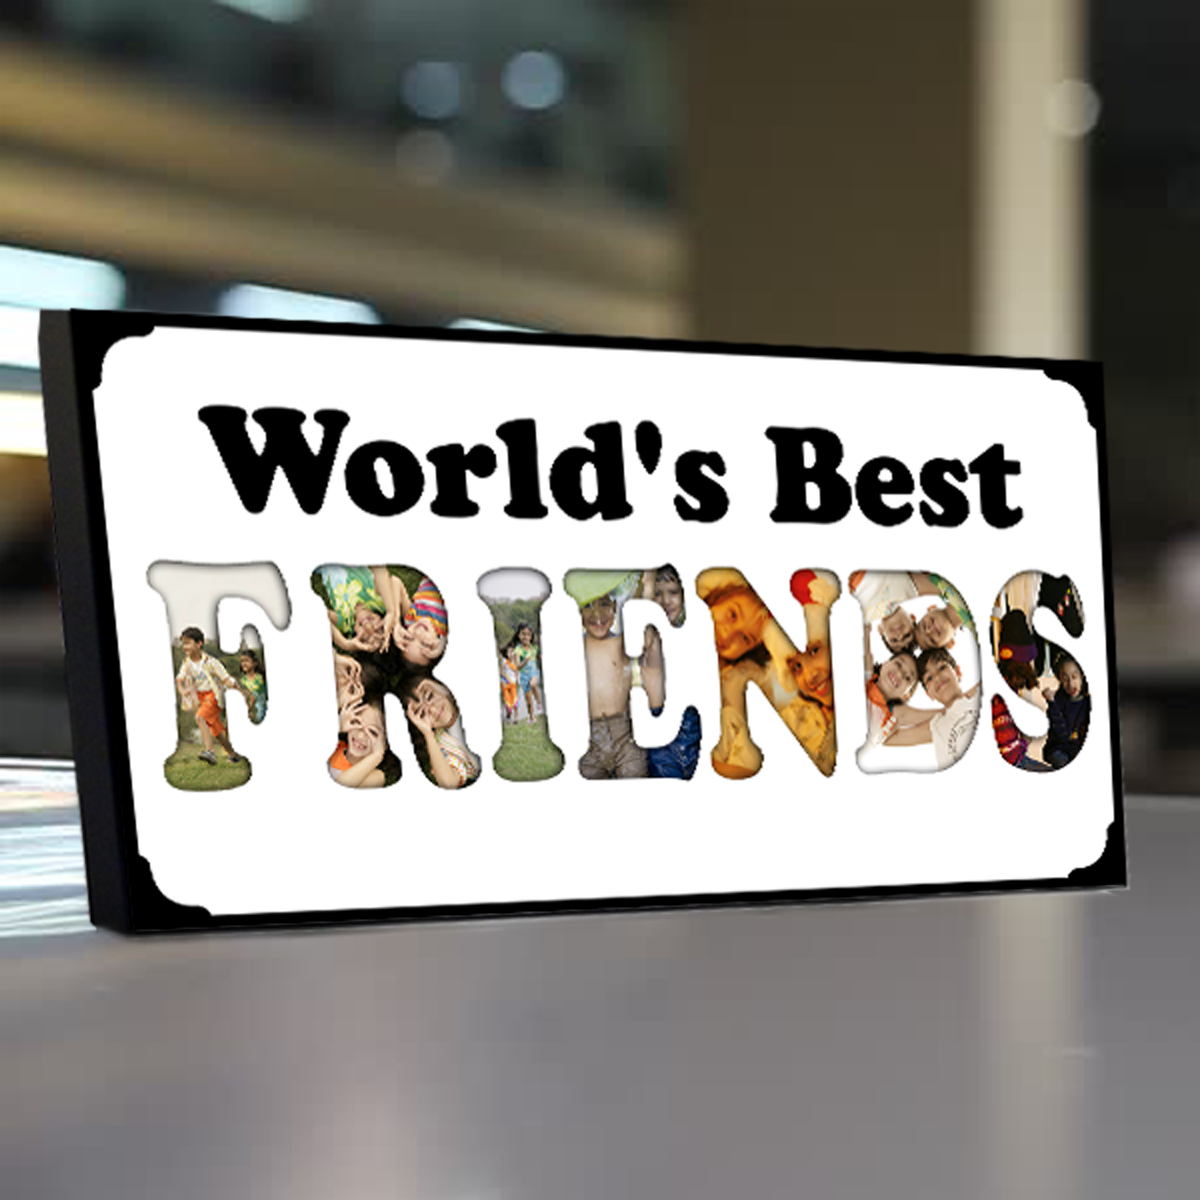 Best Friend Gift Personalized Gifts for Her Best Friend Birthday Gift –  Greatest Custom